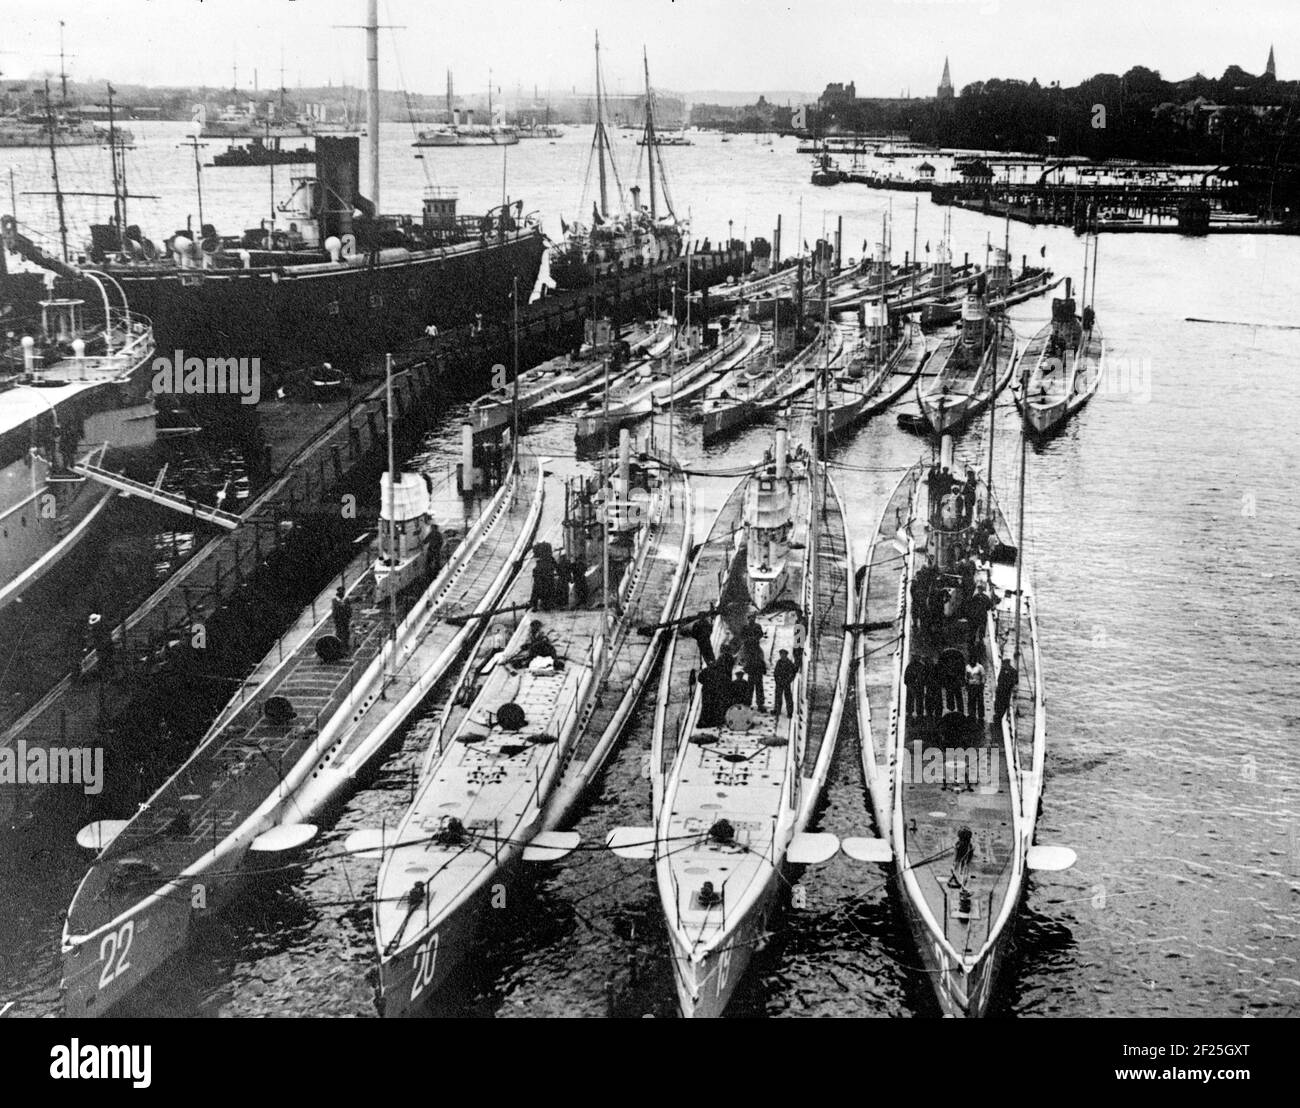 WWI German U-Boats in harbour. U-20, foreground - second from the left, sank the RMS Lusitania. Photo c. 1915 Stock Photo